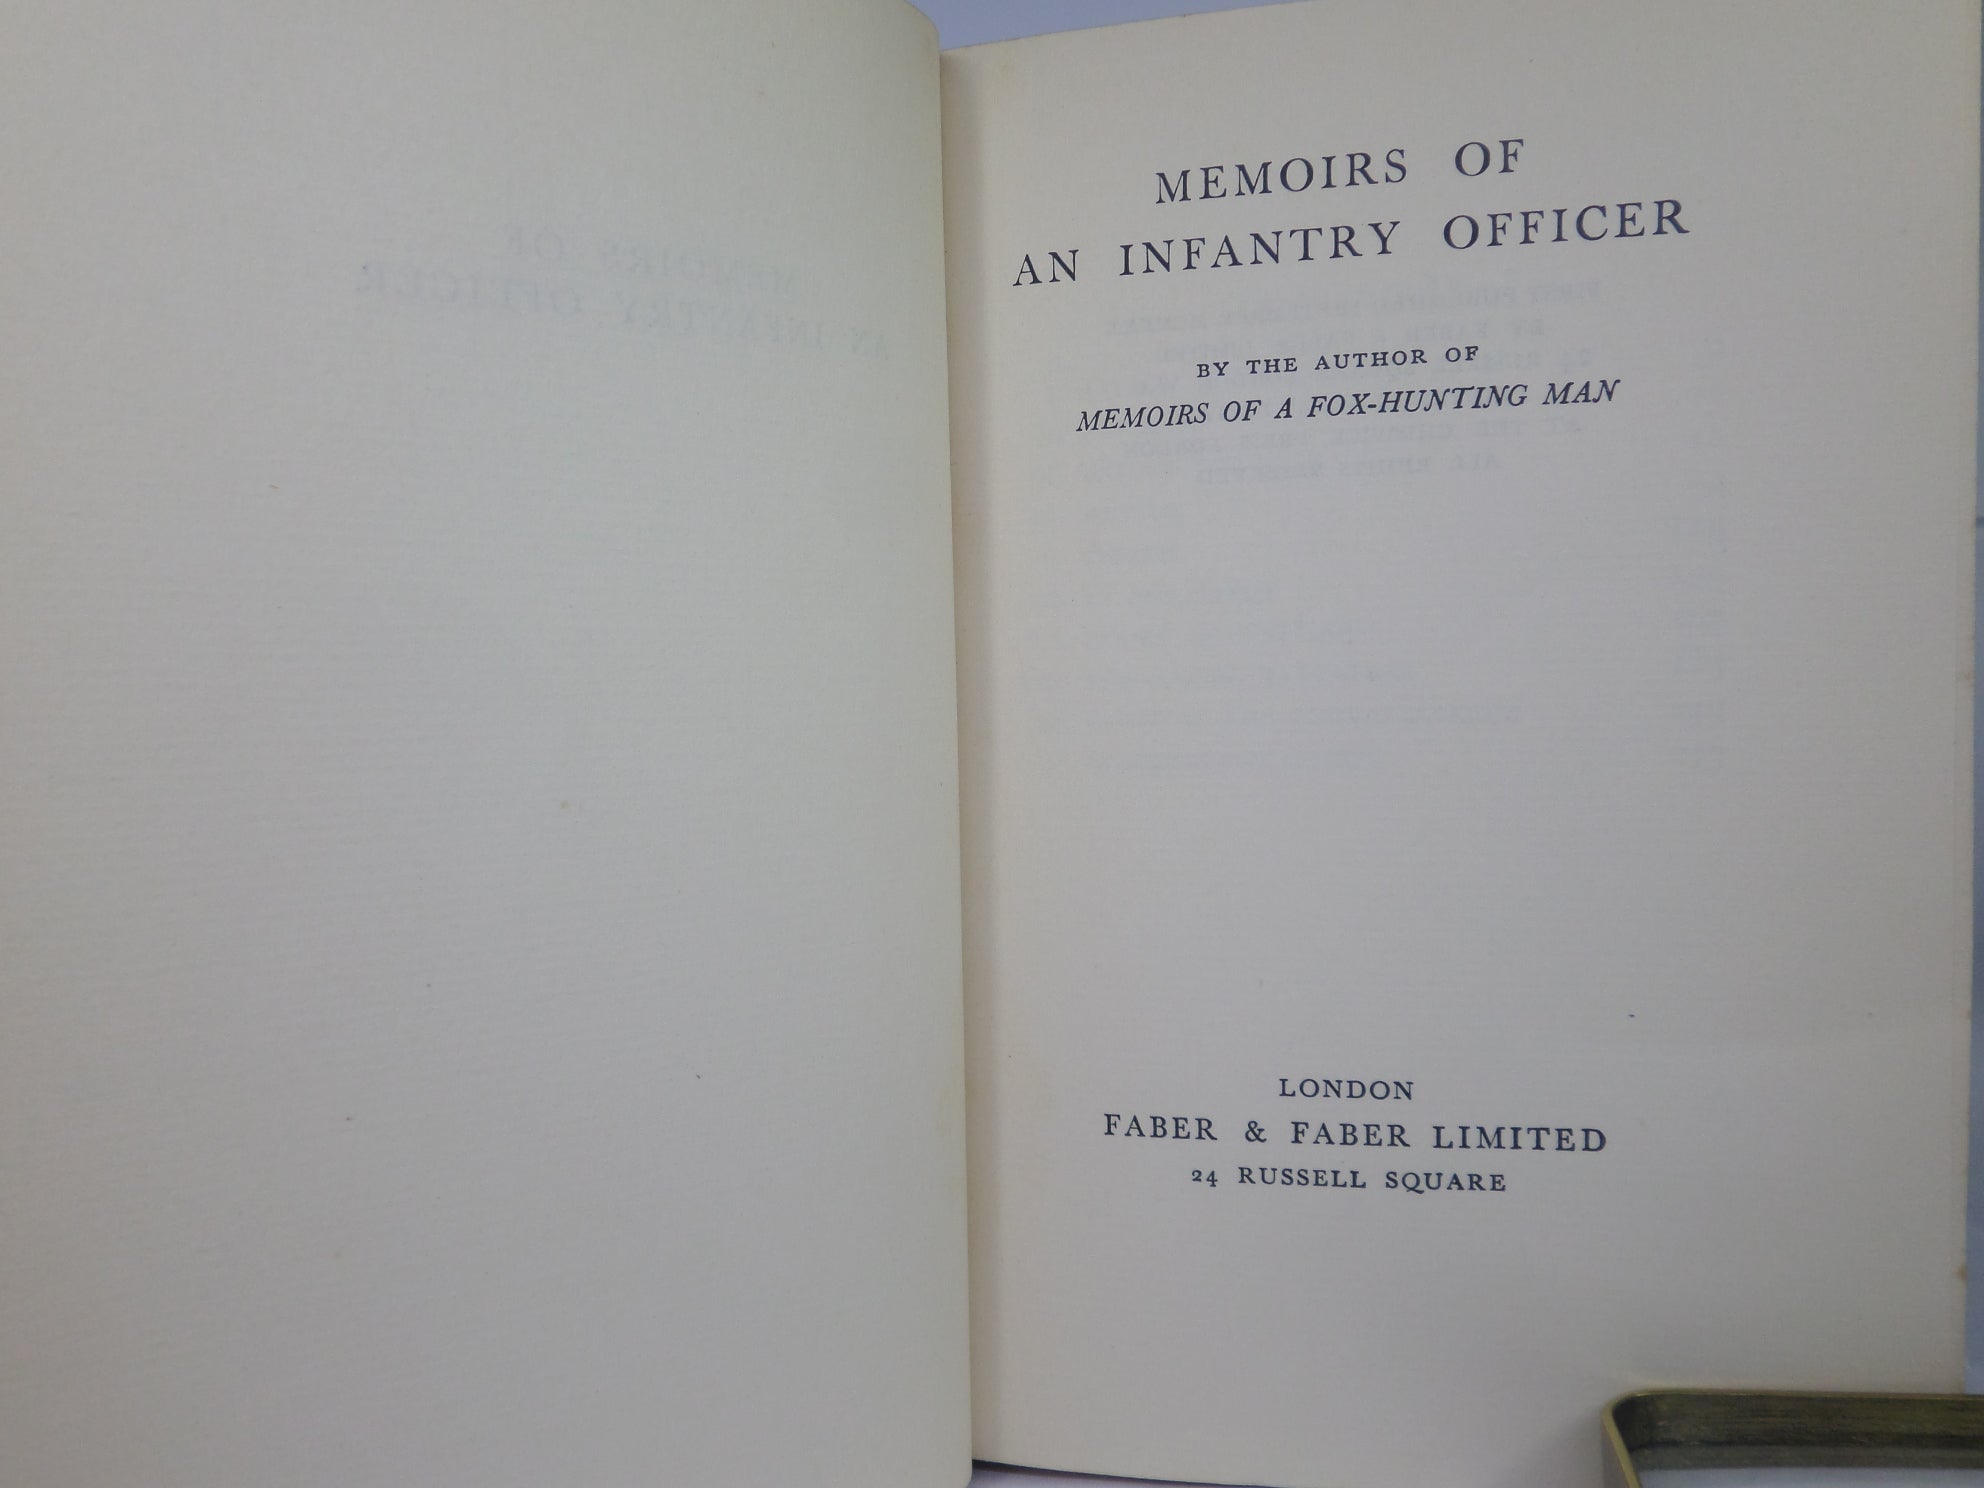 MEMOIRS OF AN INFANTRY OFFICER BY SIEGFRIED SASSOON 1930 FIRST EDITION